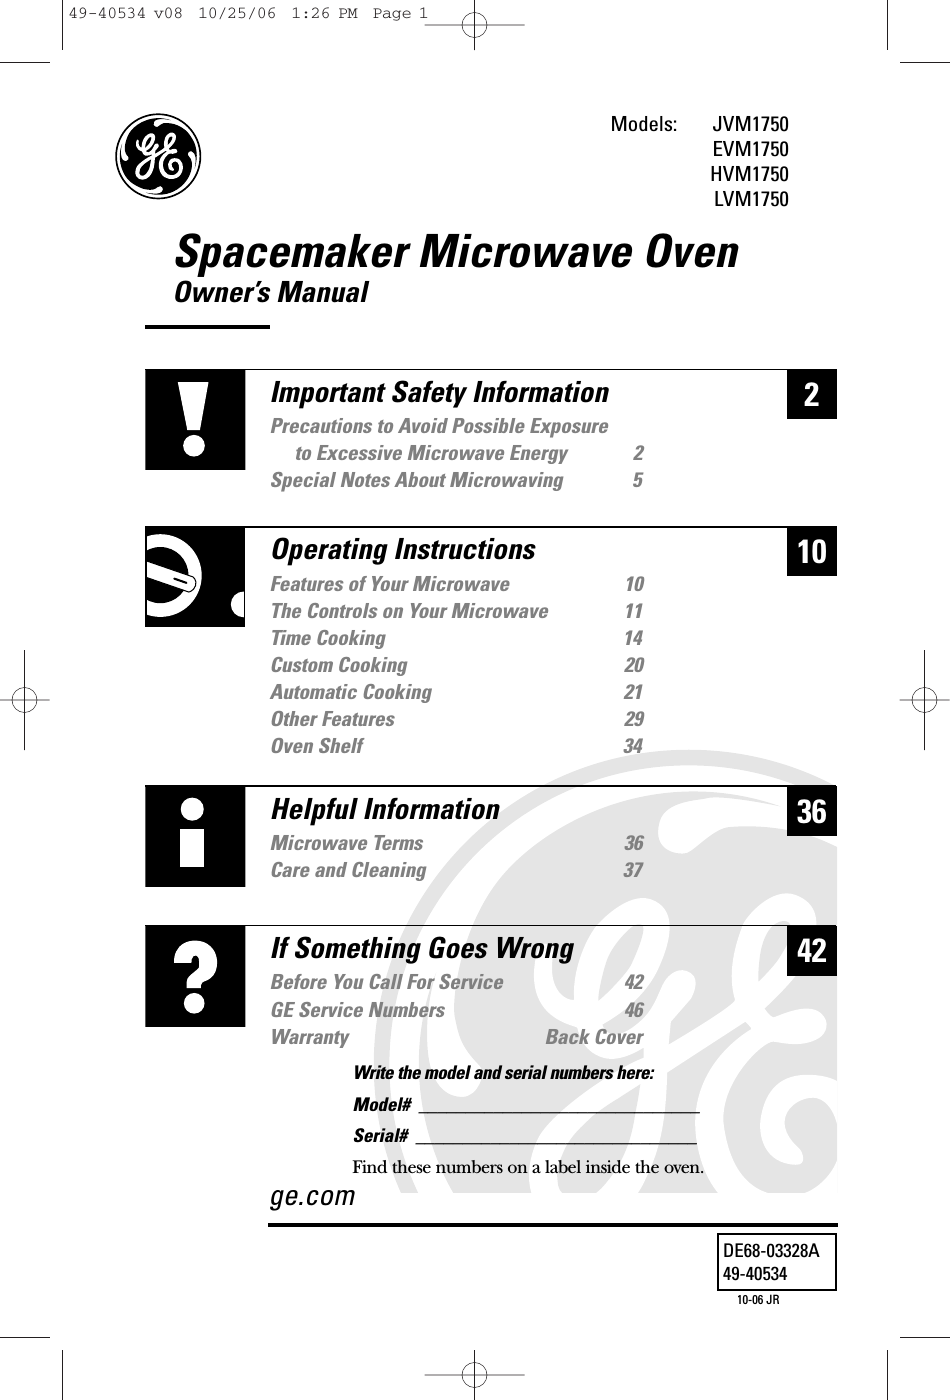 Spacemaker Microwave OvenOwner’s ManualJVM1750EVM1750HVM1750LVM1750236Helpful InformationMicrowave Terms  36Care and Cleaning 3742If Something Goes WrongBefore You Call For Service 42GE Service Numbers 46Warranty Back Coverge.com10Important Safety InformationPrecautions to Avoid Possible Exposure to Excessive Microwave Energy 2Special Notes About Microwaving 5Operating InstructionsFeatures of Your Microwave 10The Controls on Your Microwave 11Time Cooking 14Custom Cooking 20Automatic Cooking 21Other Features 29Oven Shelf  34Models: DE68-03328A49-4053410-06 JRWrite the model and serial numbers here:Model#  ______________________________Serial#  ______________________________Find these numbers on a label inside the oven.49-40534 v08  10/25/06  1:26 PM  Page 1